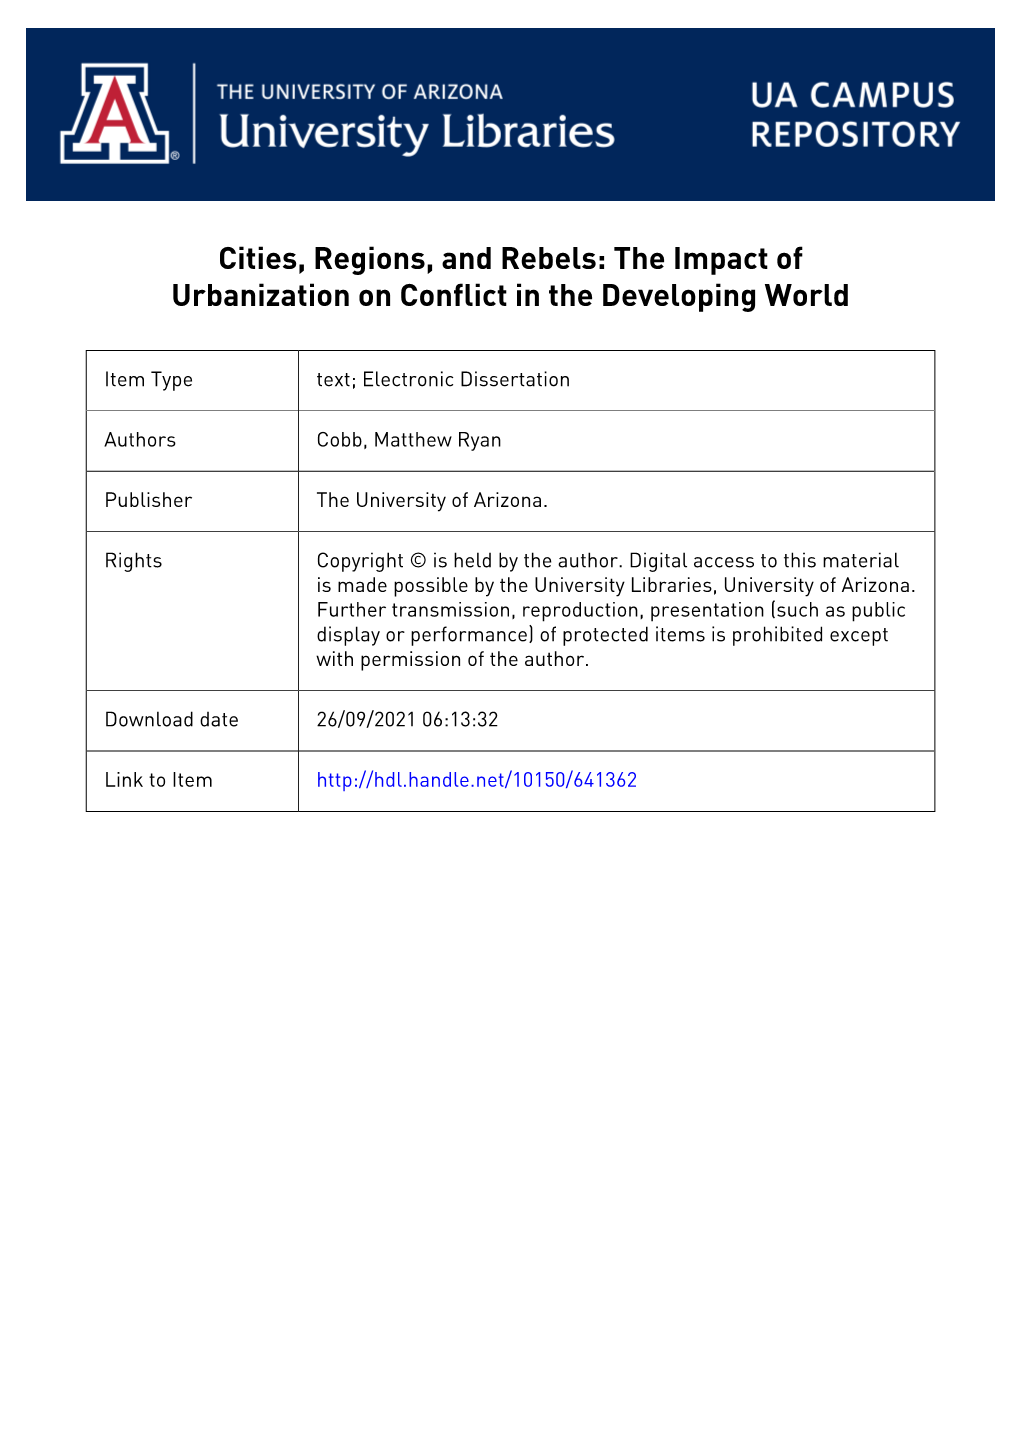 Cities, Regions, and Rebels the Impact of Urbanization On